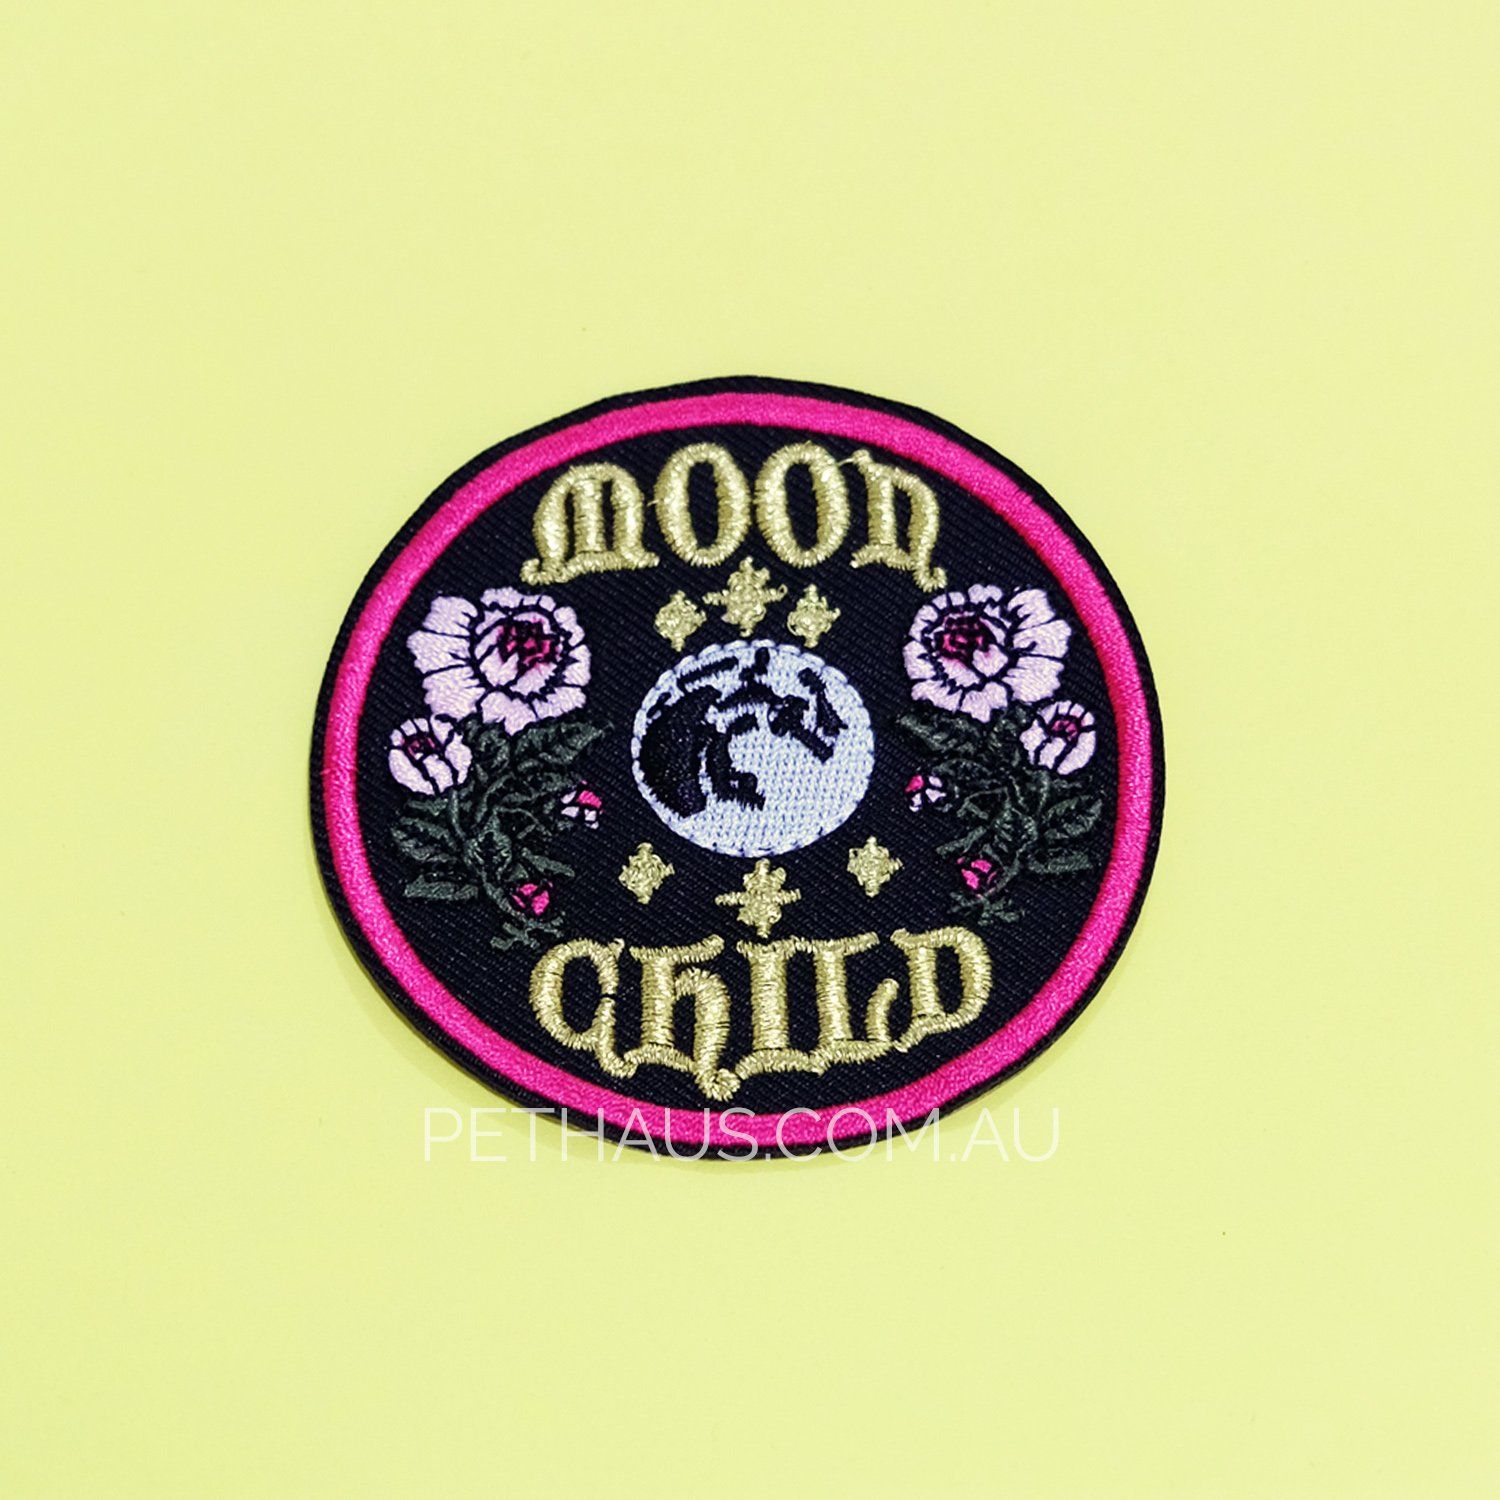 Moon child patch, hippy patch, feminist patch